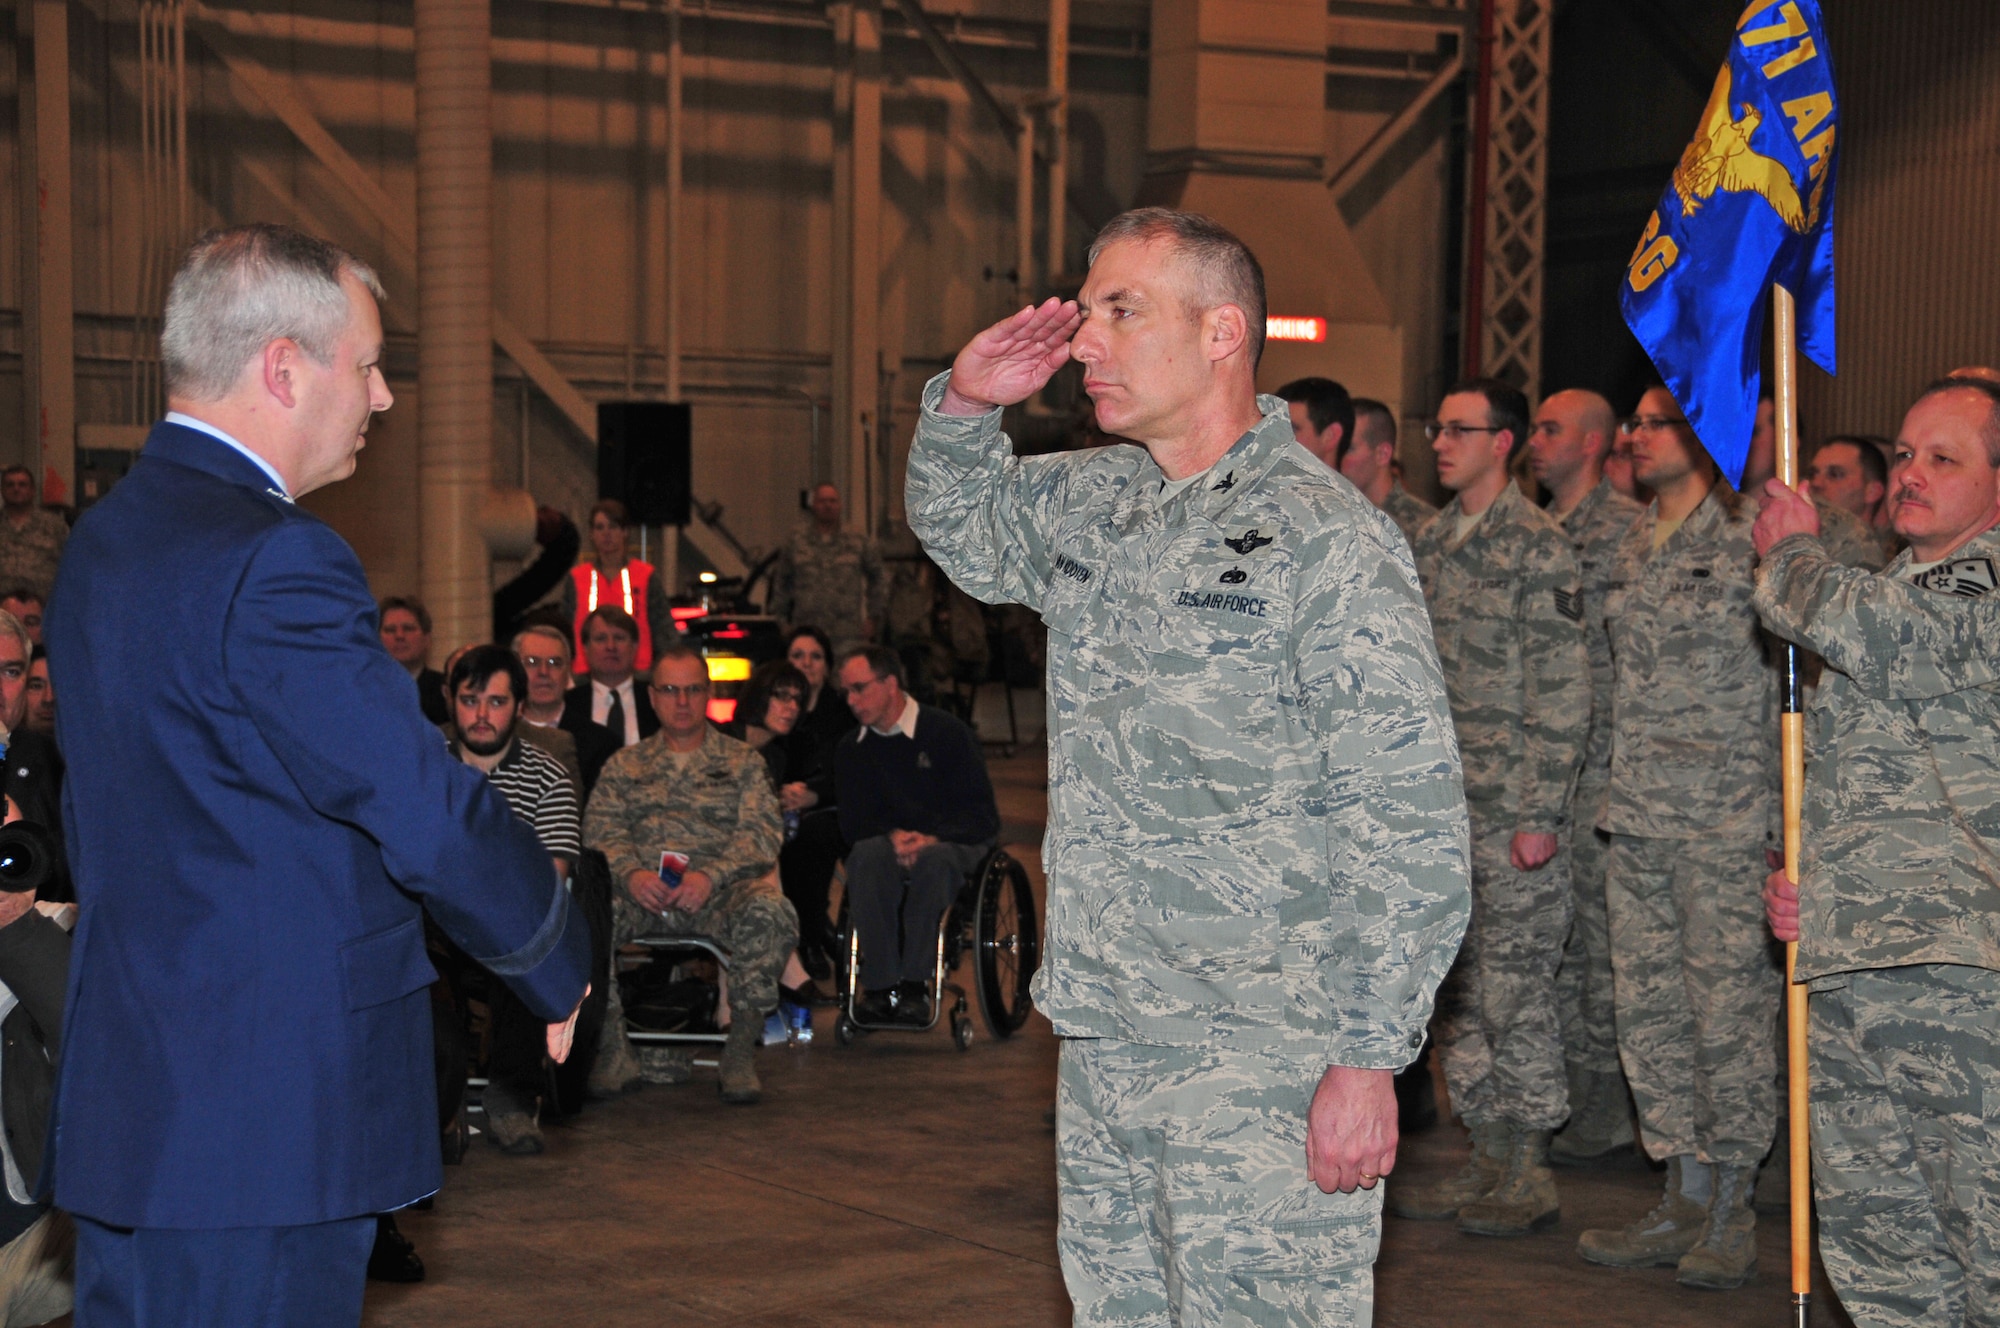 The 171st Air Refueling Wing hosts a change of command ceremony Sunday, Feb. 5.  Col. Anthony J. Carrelli accepts command of the 171st Air Refueling Wing from Brig. Gen. Roy Uptegraff who served as the unit's wing commander since 2006. Maj. Gen. Stephen Sischo, commander of the Pennsylvania Air National Guard, is the official host of the ceremony and is joined by distinguished military officials and community leaders. 

(National Guard photo by Master Sgt. Stacey Barkey/Released)